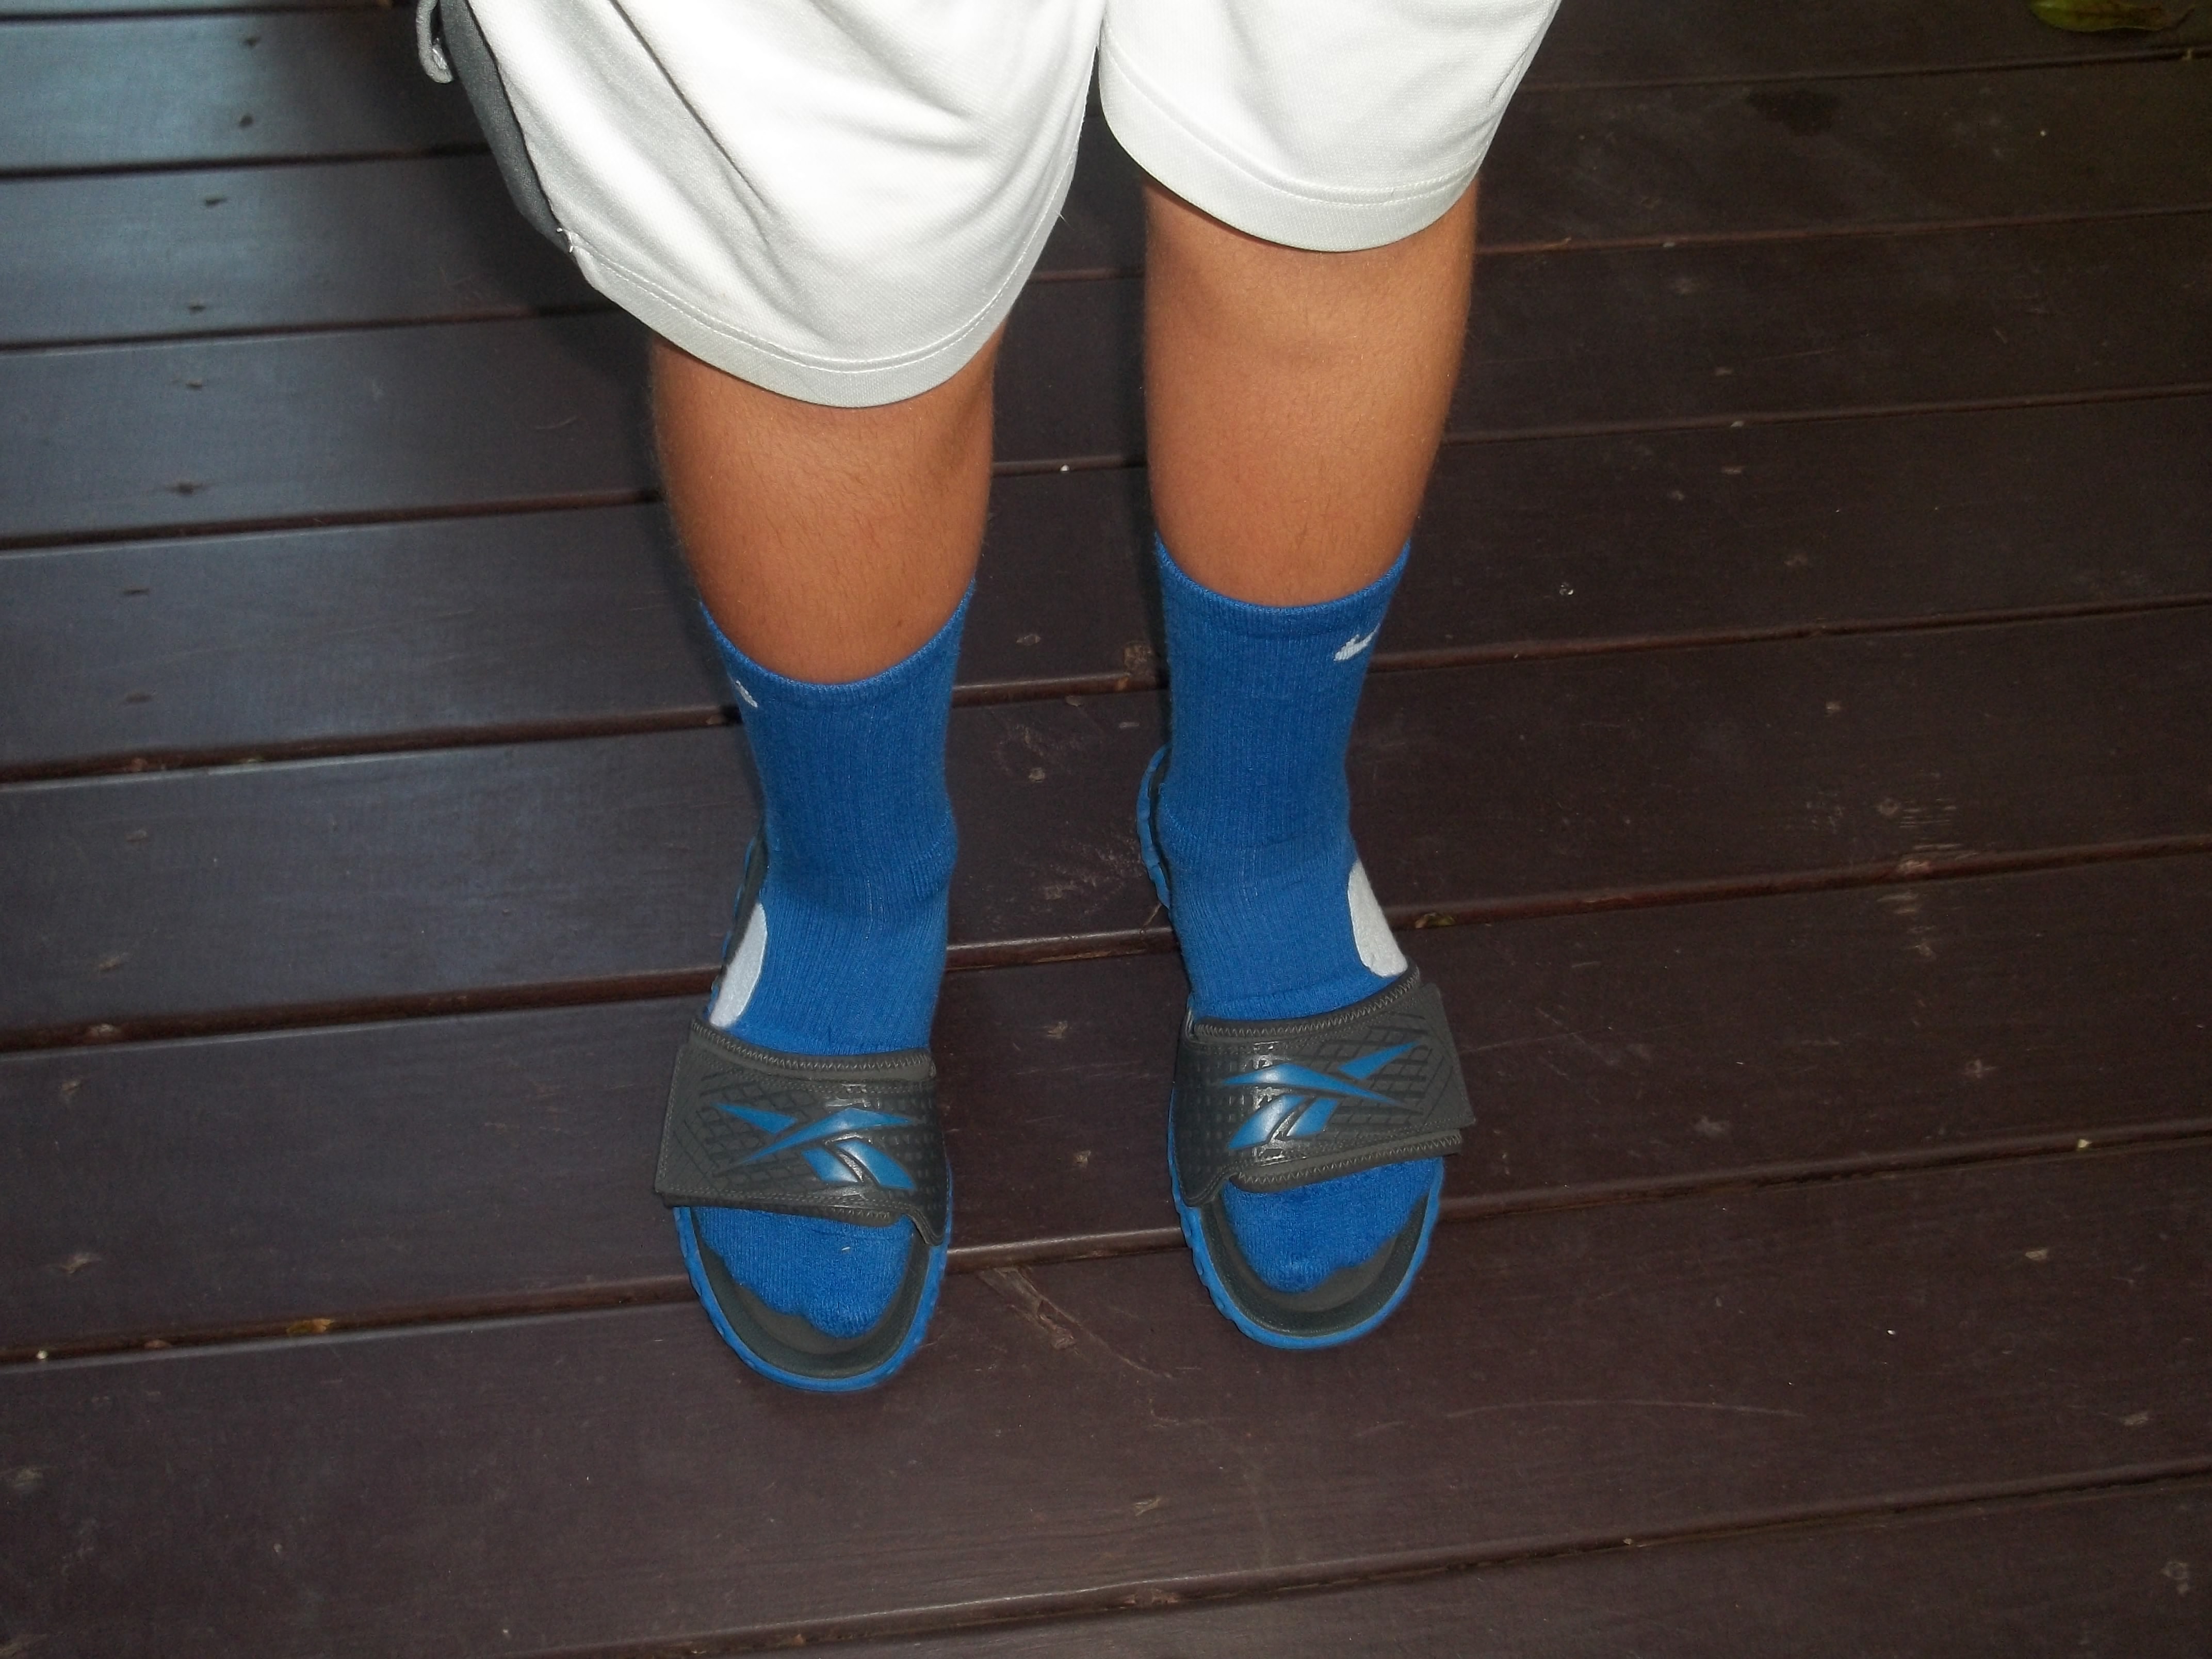 Nike Socks With Sandals Black socks with sandals